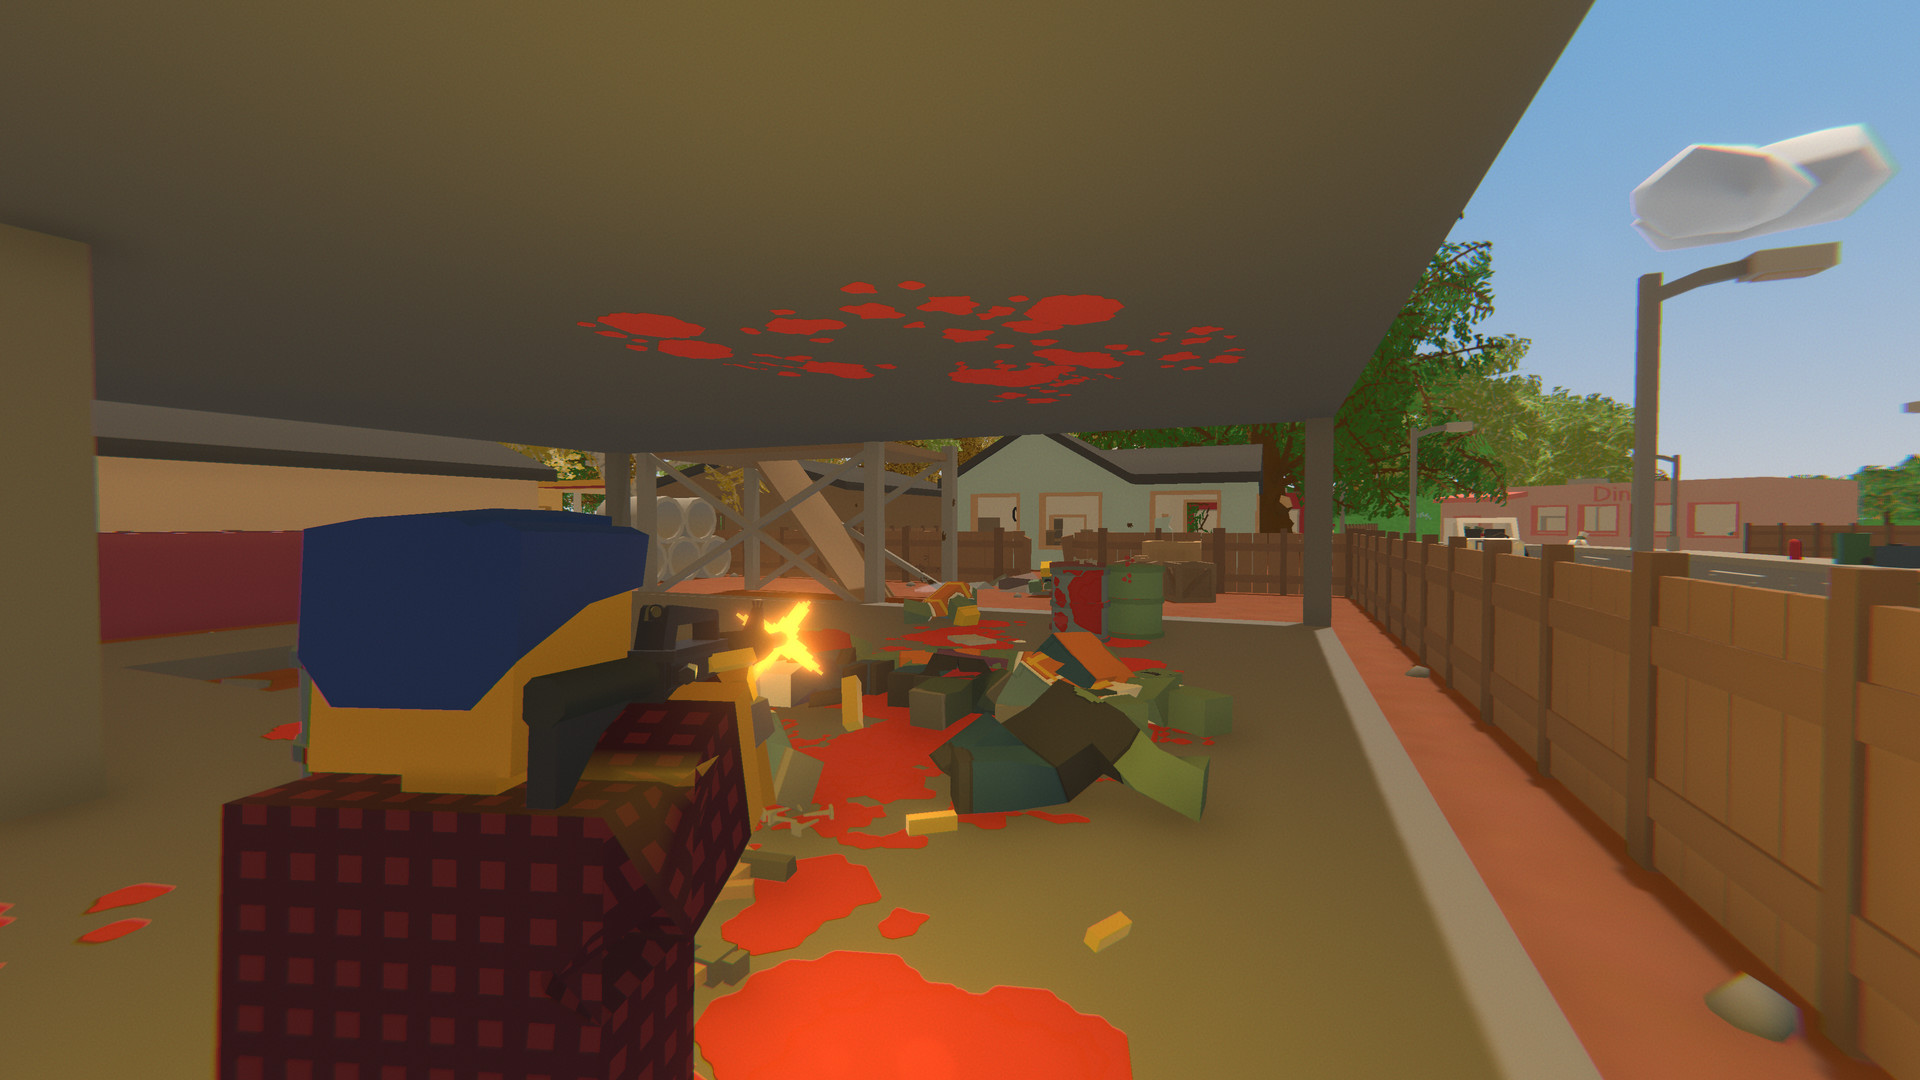 unturned free download android